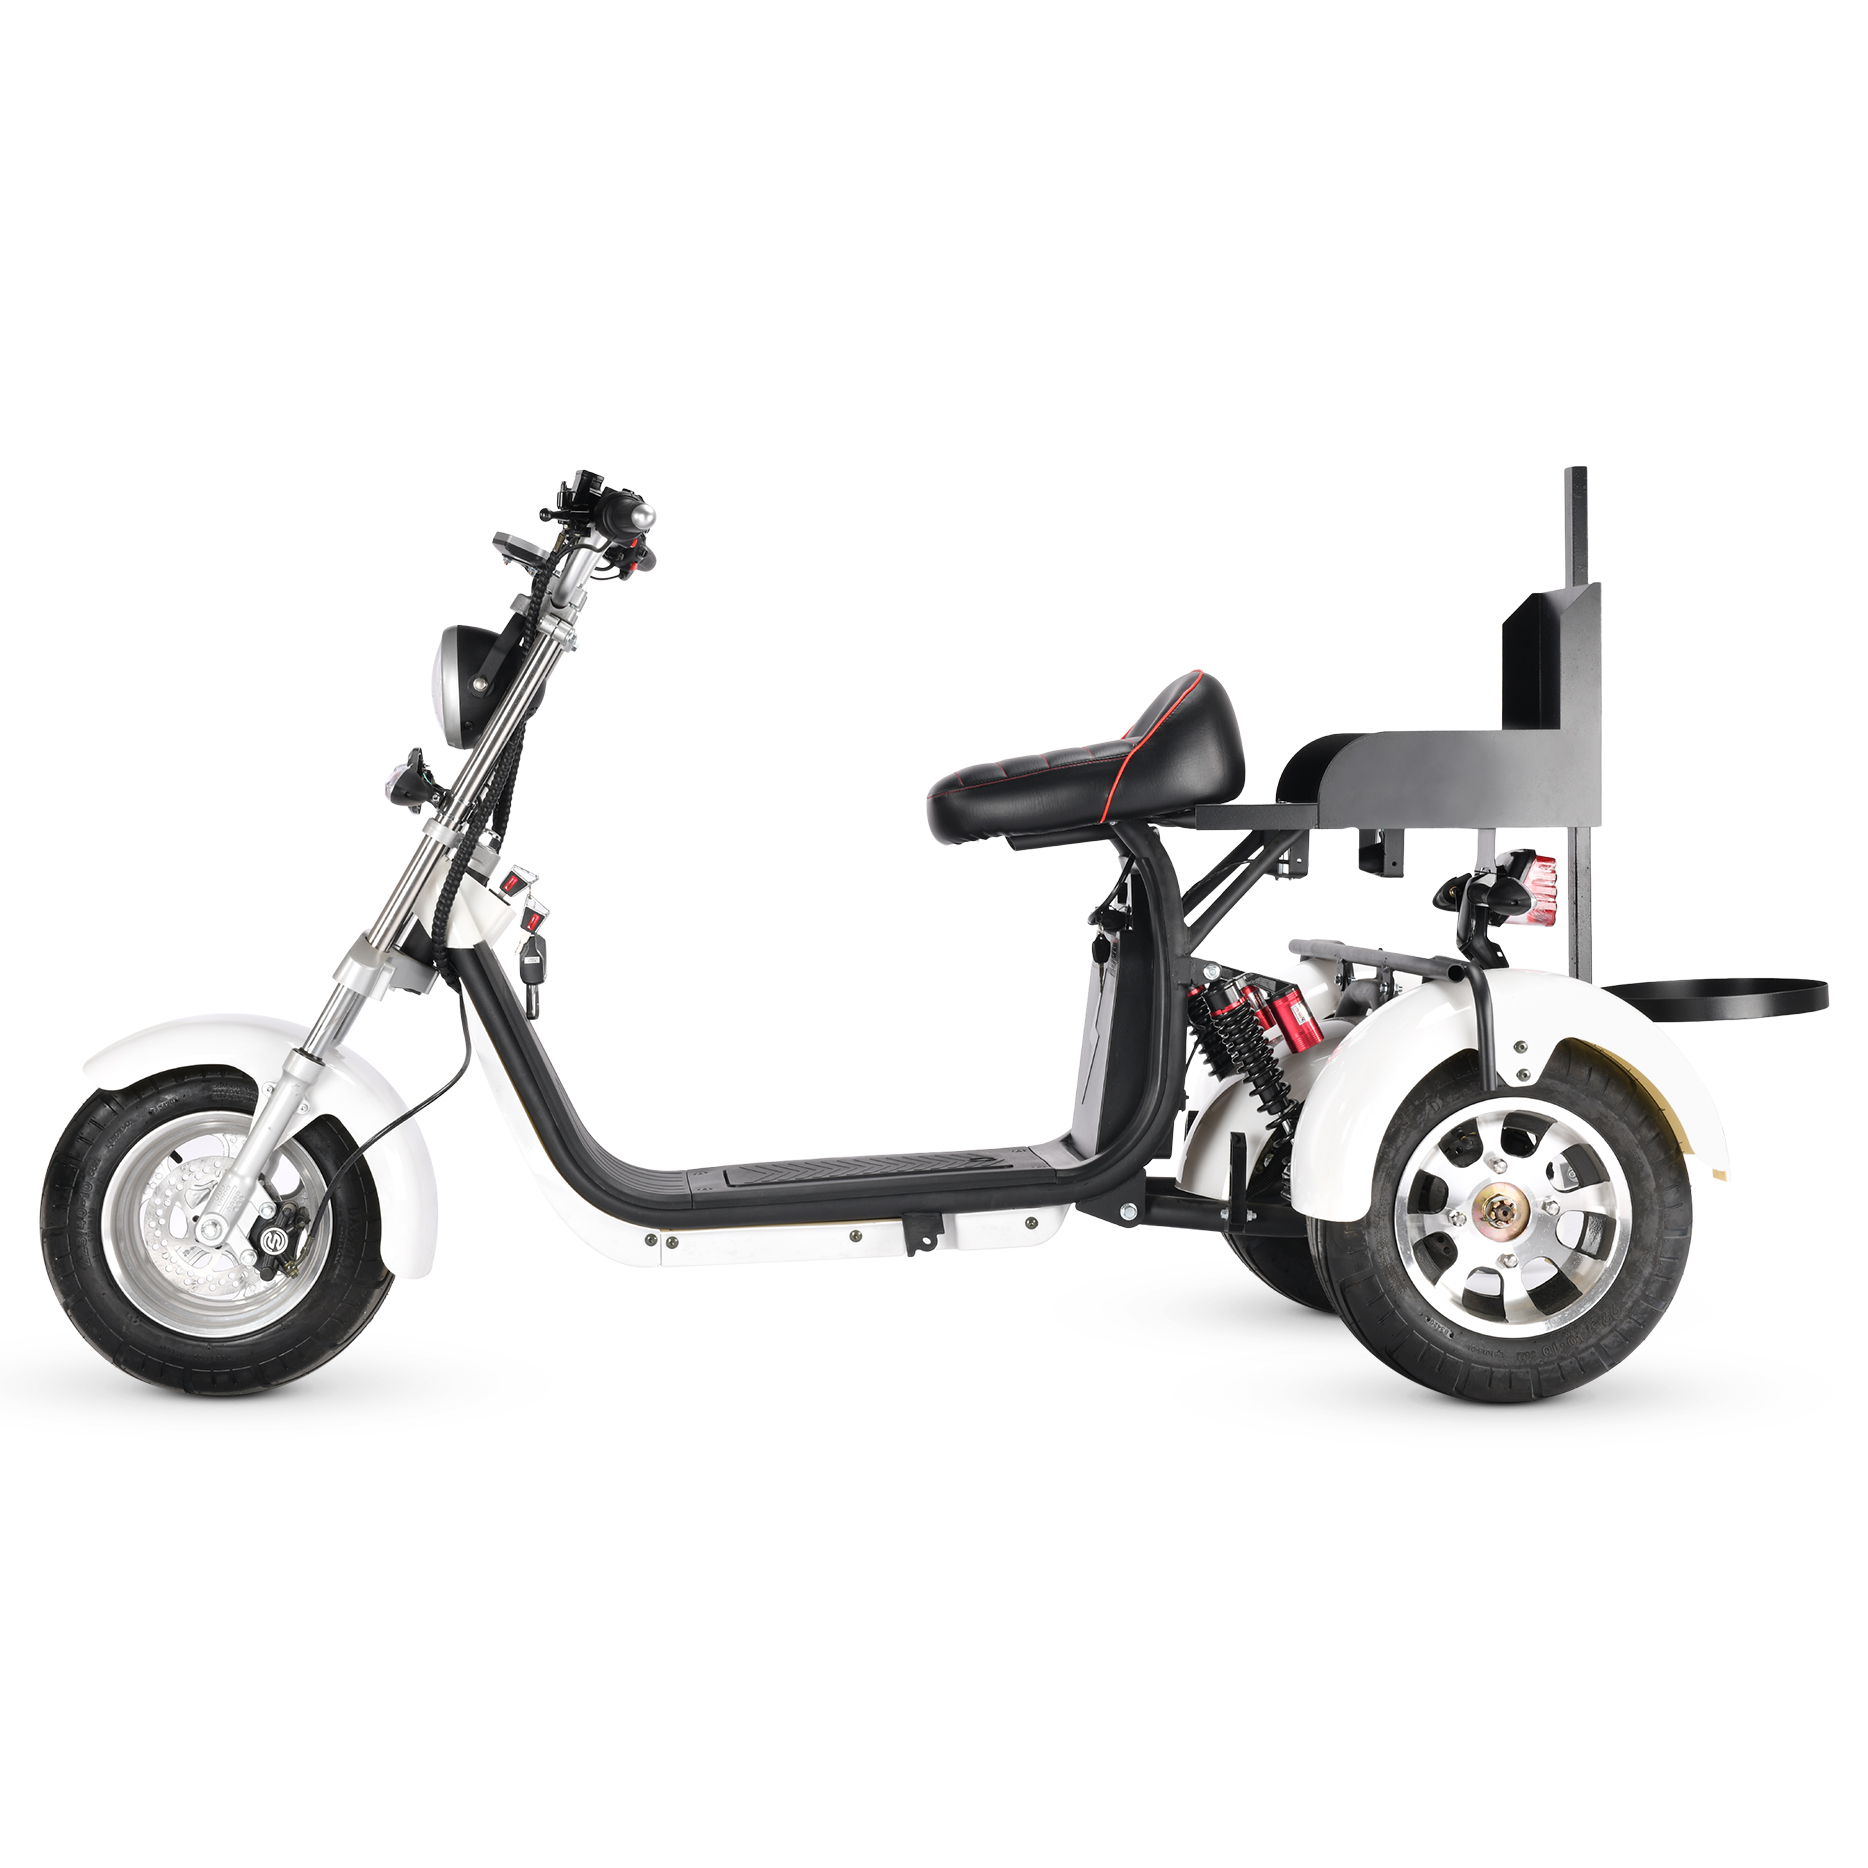 New Model 3 wheel citycoco scooter with golf bag carry